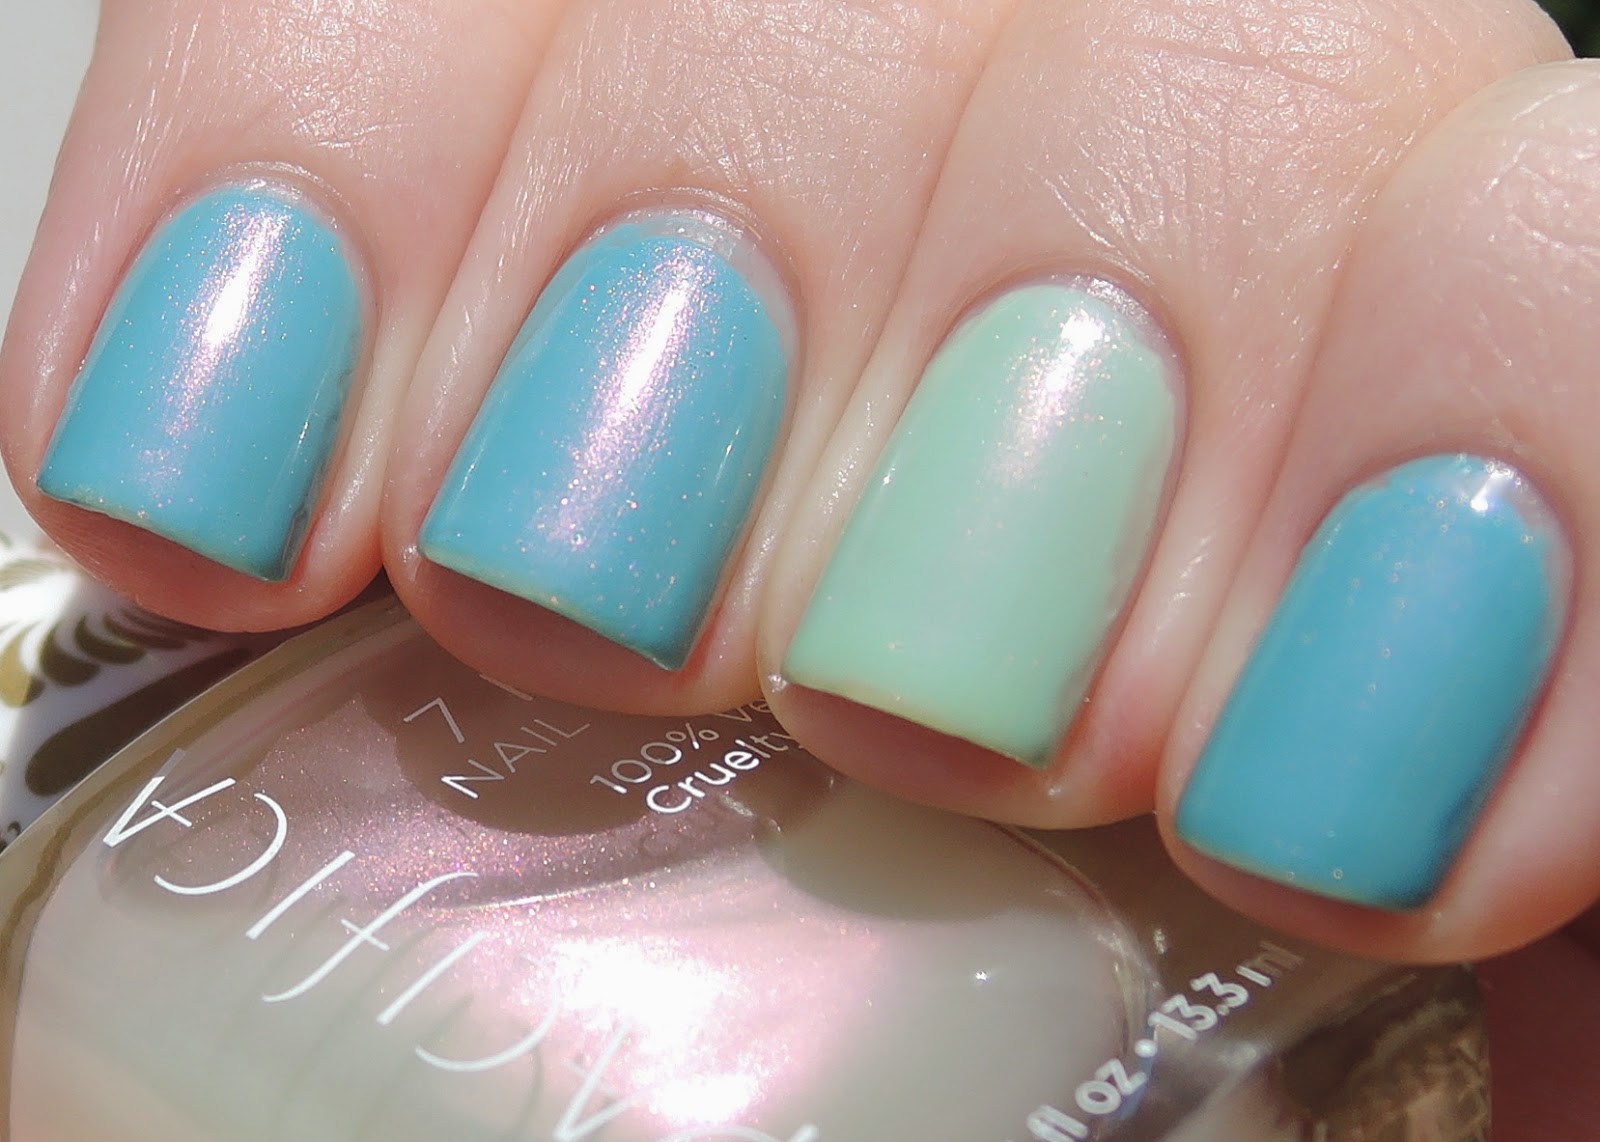 1. Pacifica 7 Free Nail Color Unicorn Horn - wide 6